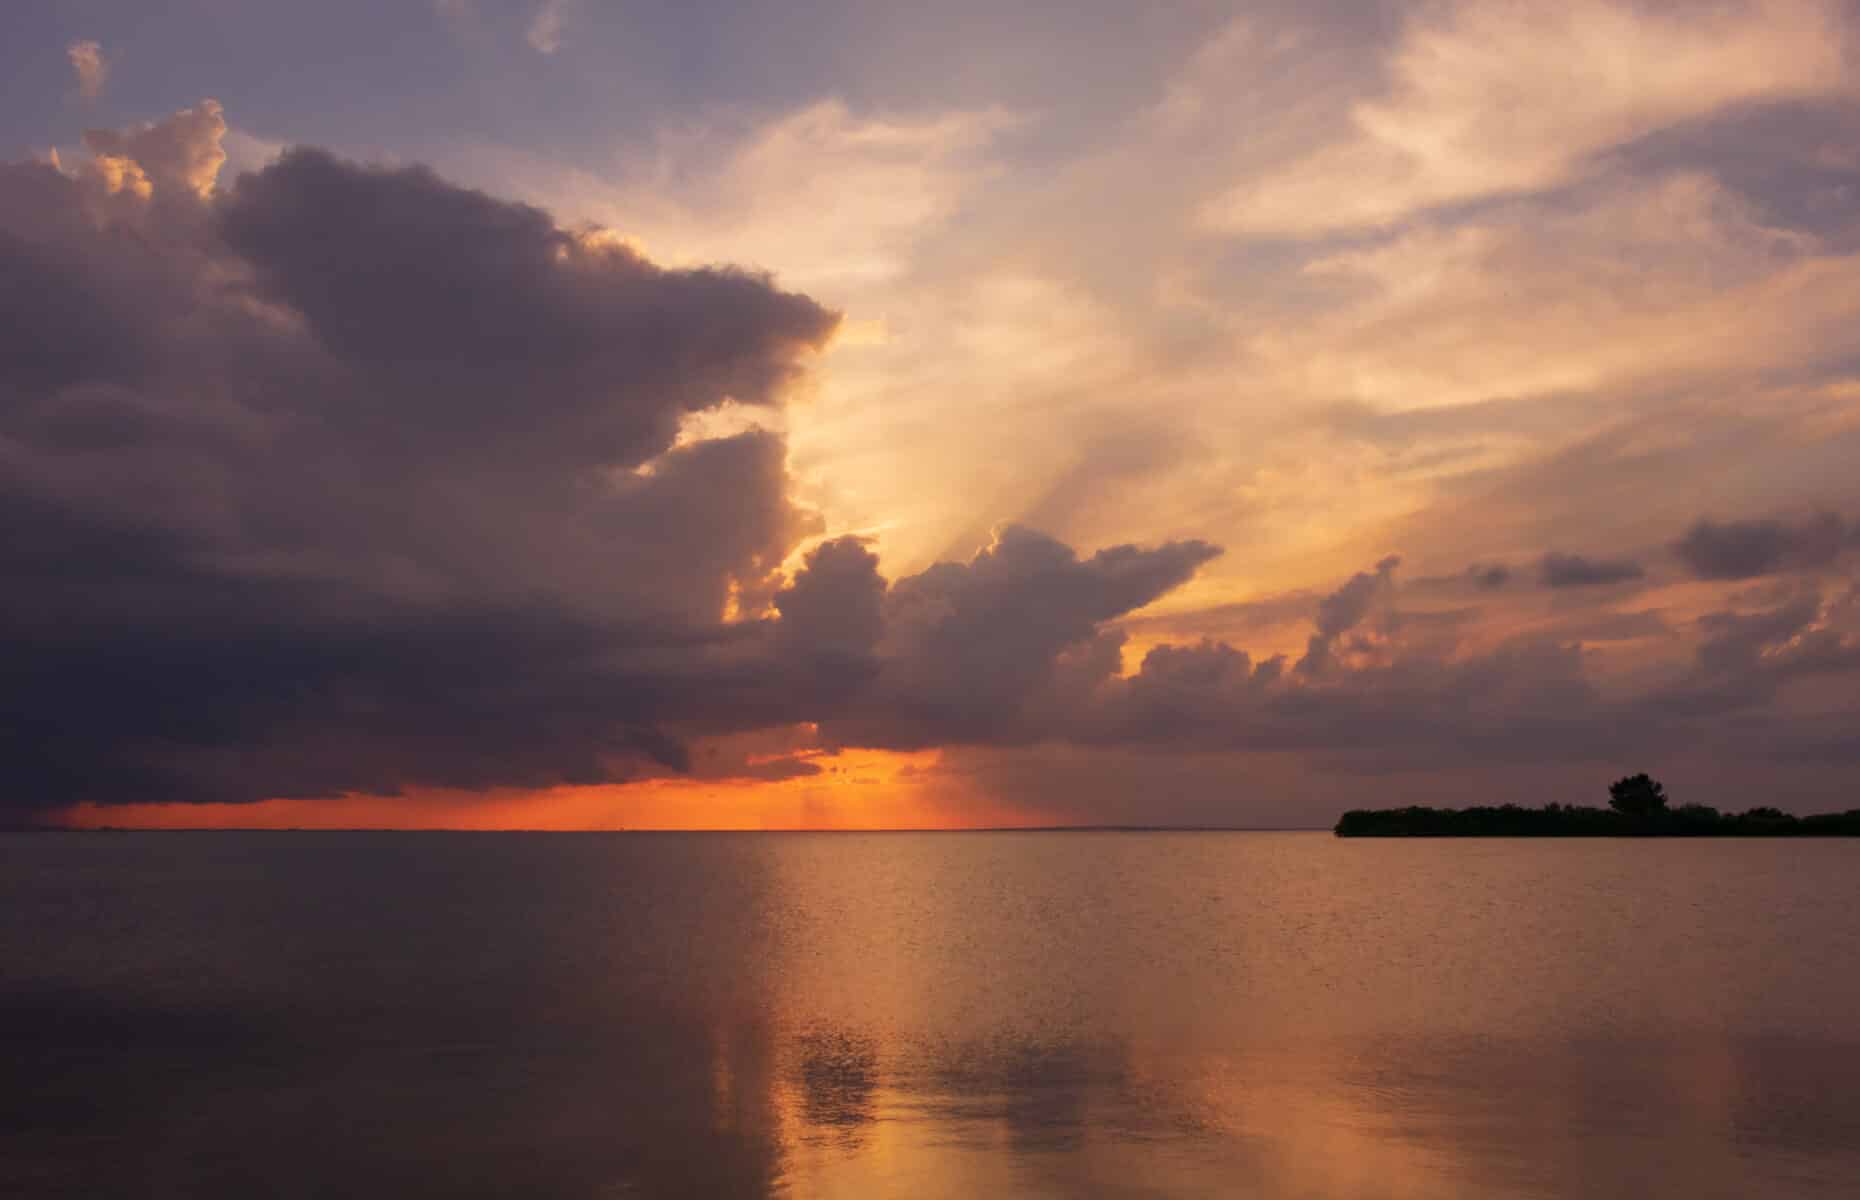 A scenery of sunset in a calm ocean